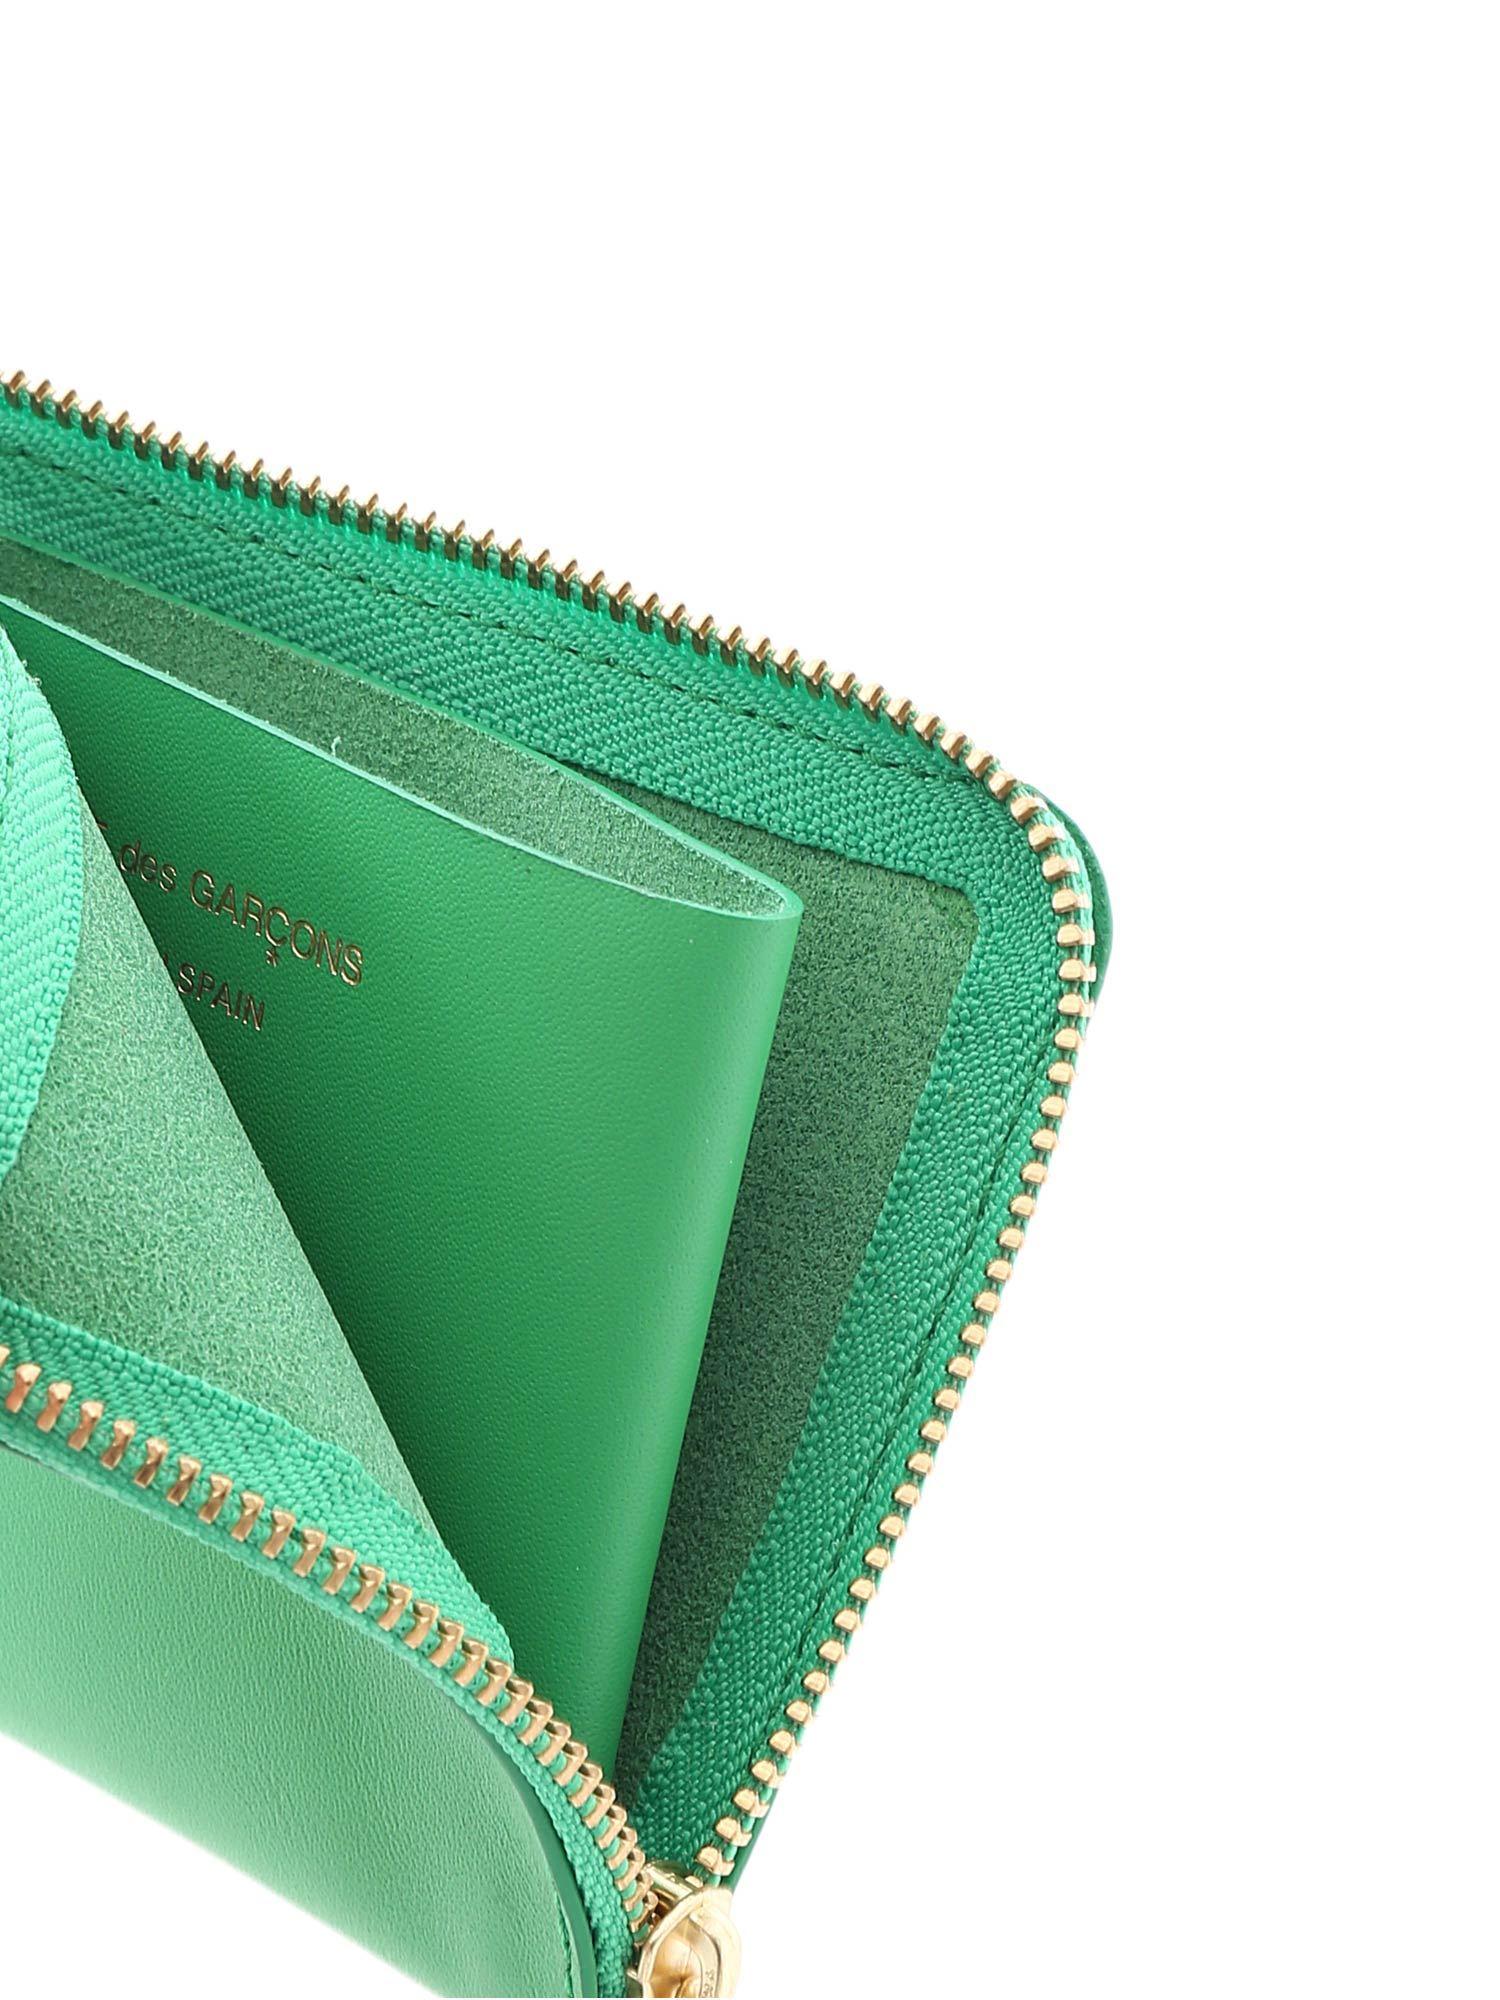 Comme des Garçons Classic Leather Wallet in Green for Men - Lyst